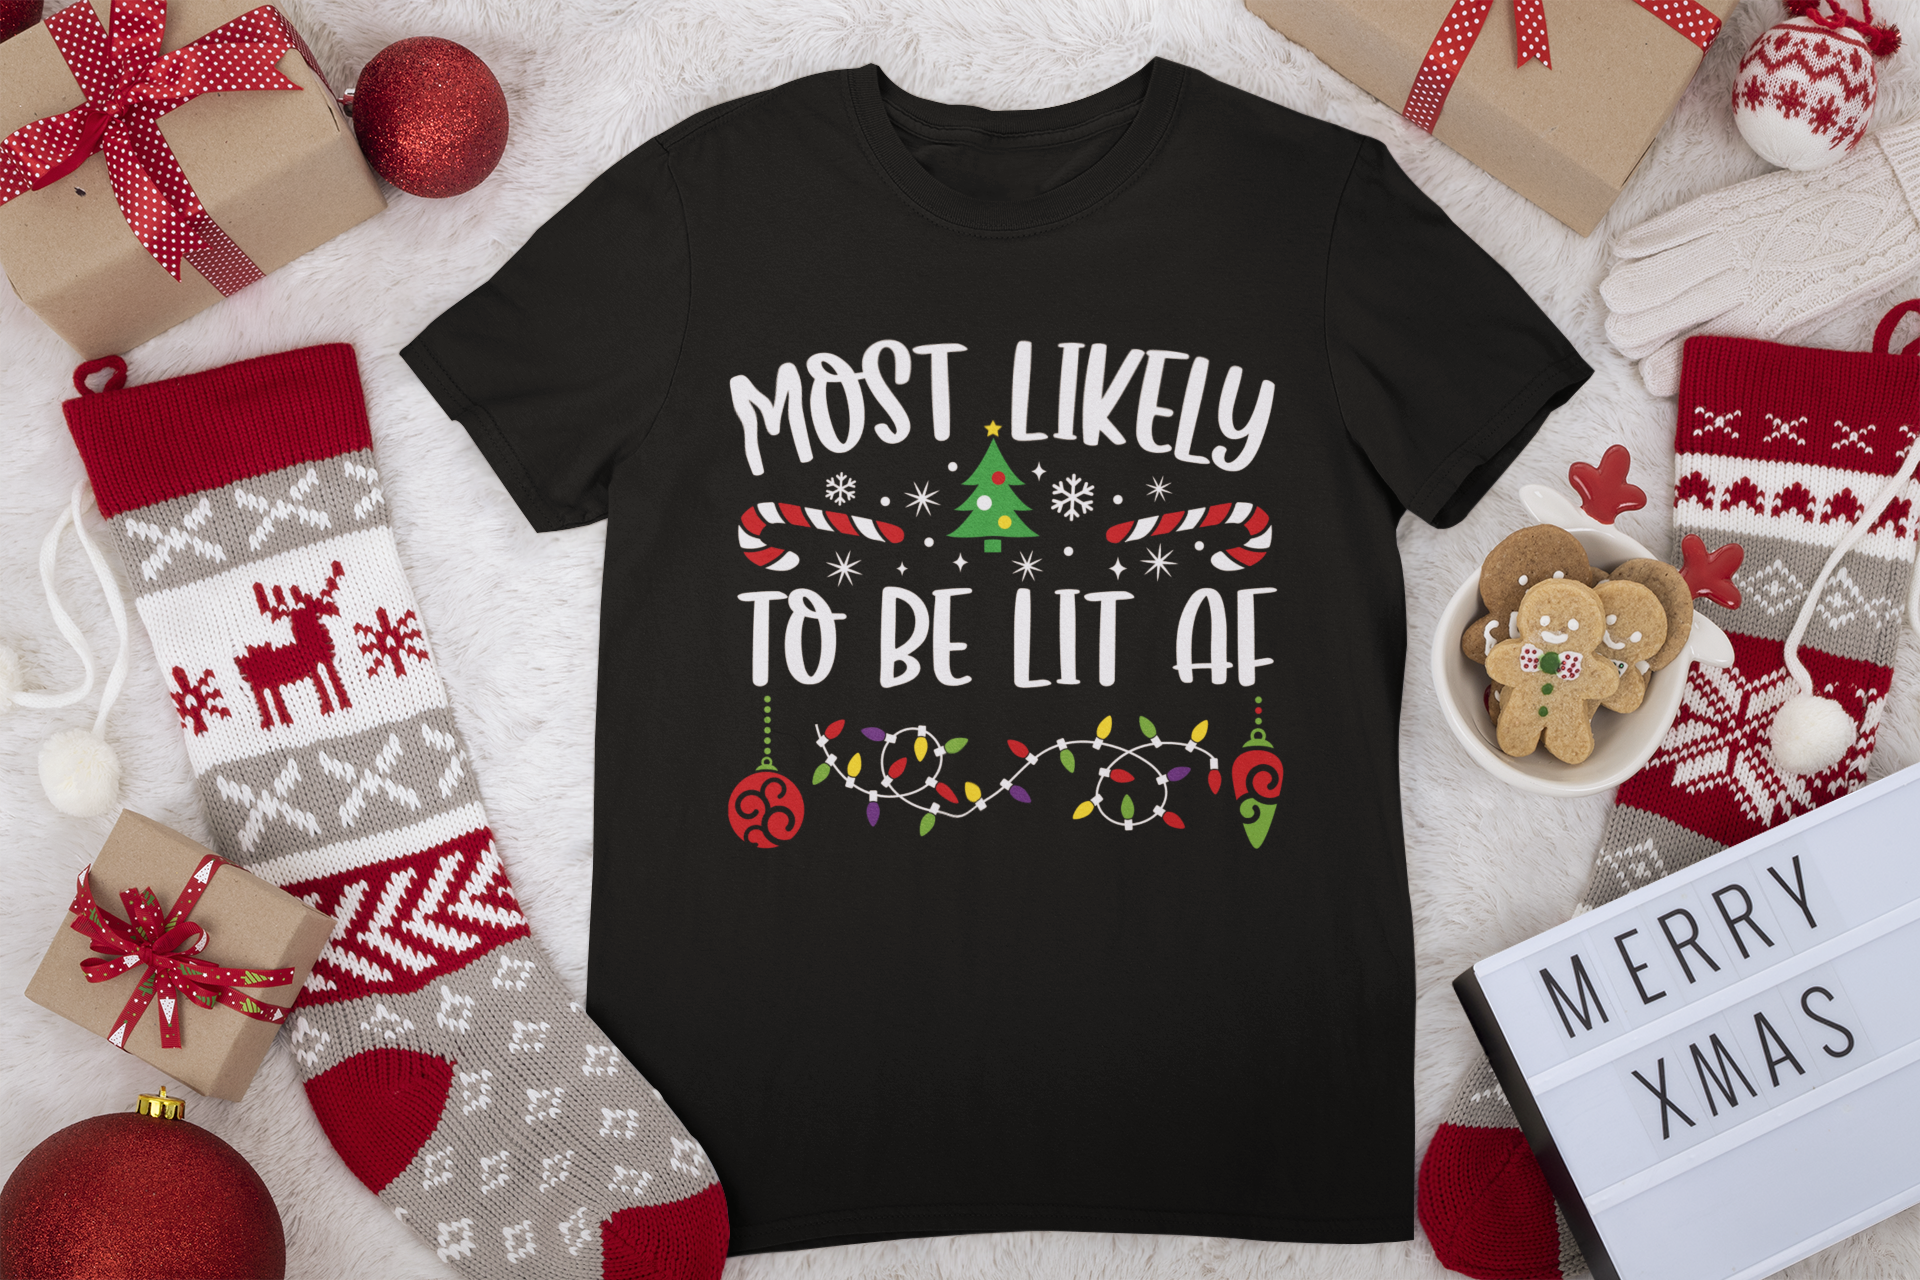 Most Likely to be Lit AF Funny Matching Family Christmas Unisex Short Sleeve Tee